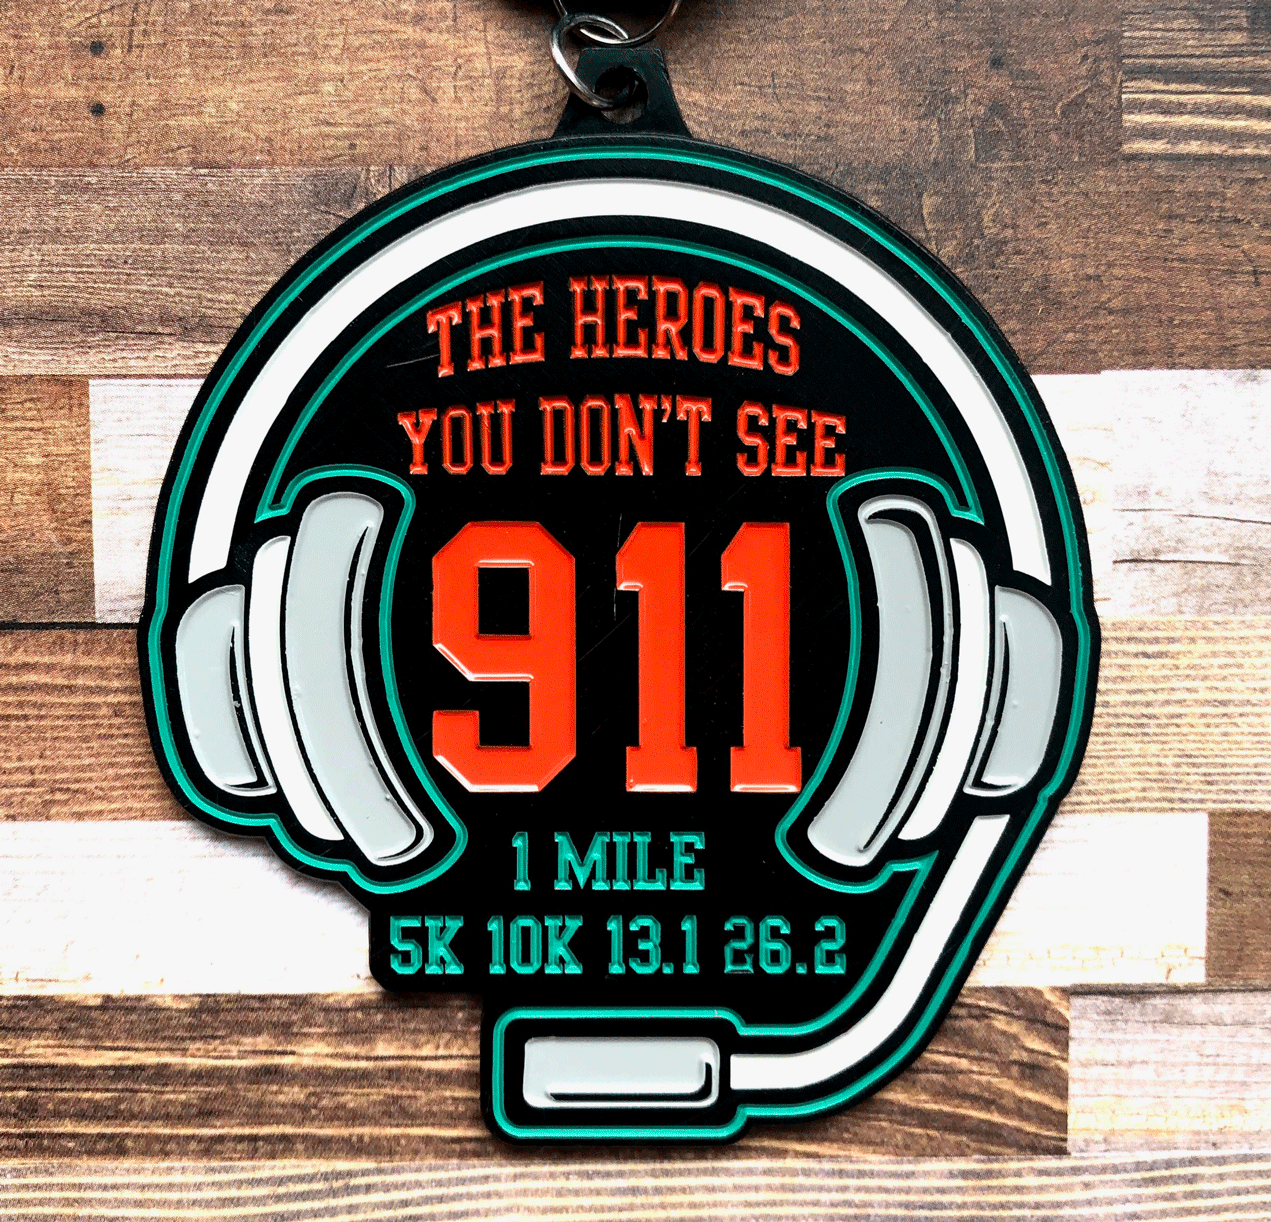 Only $9! The Heroes You Don't See 1 M 5K 10K 13.1 26.2 -Boise